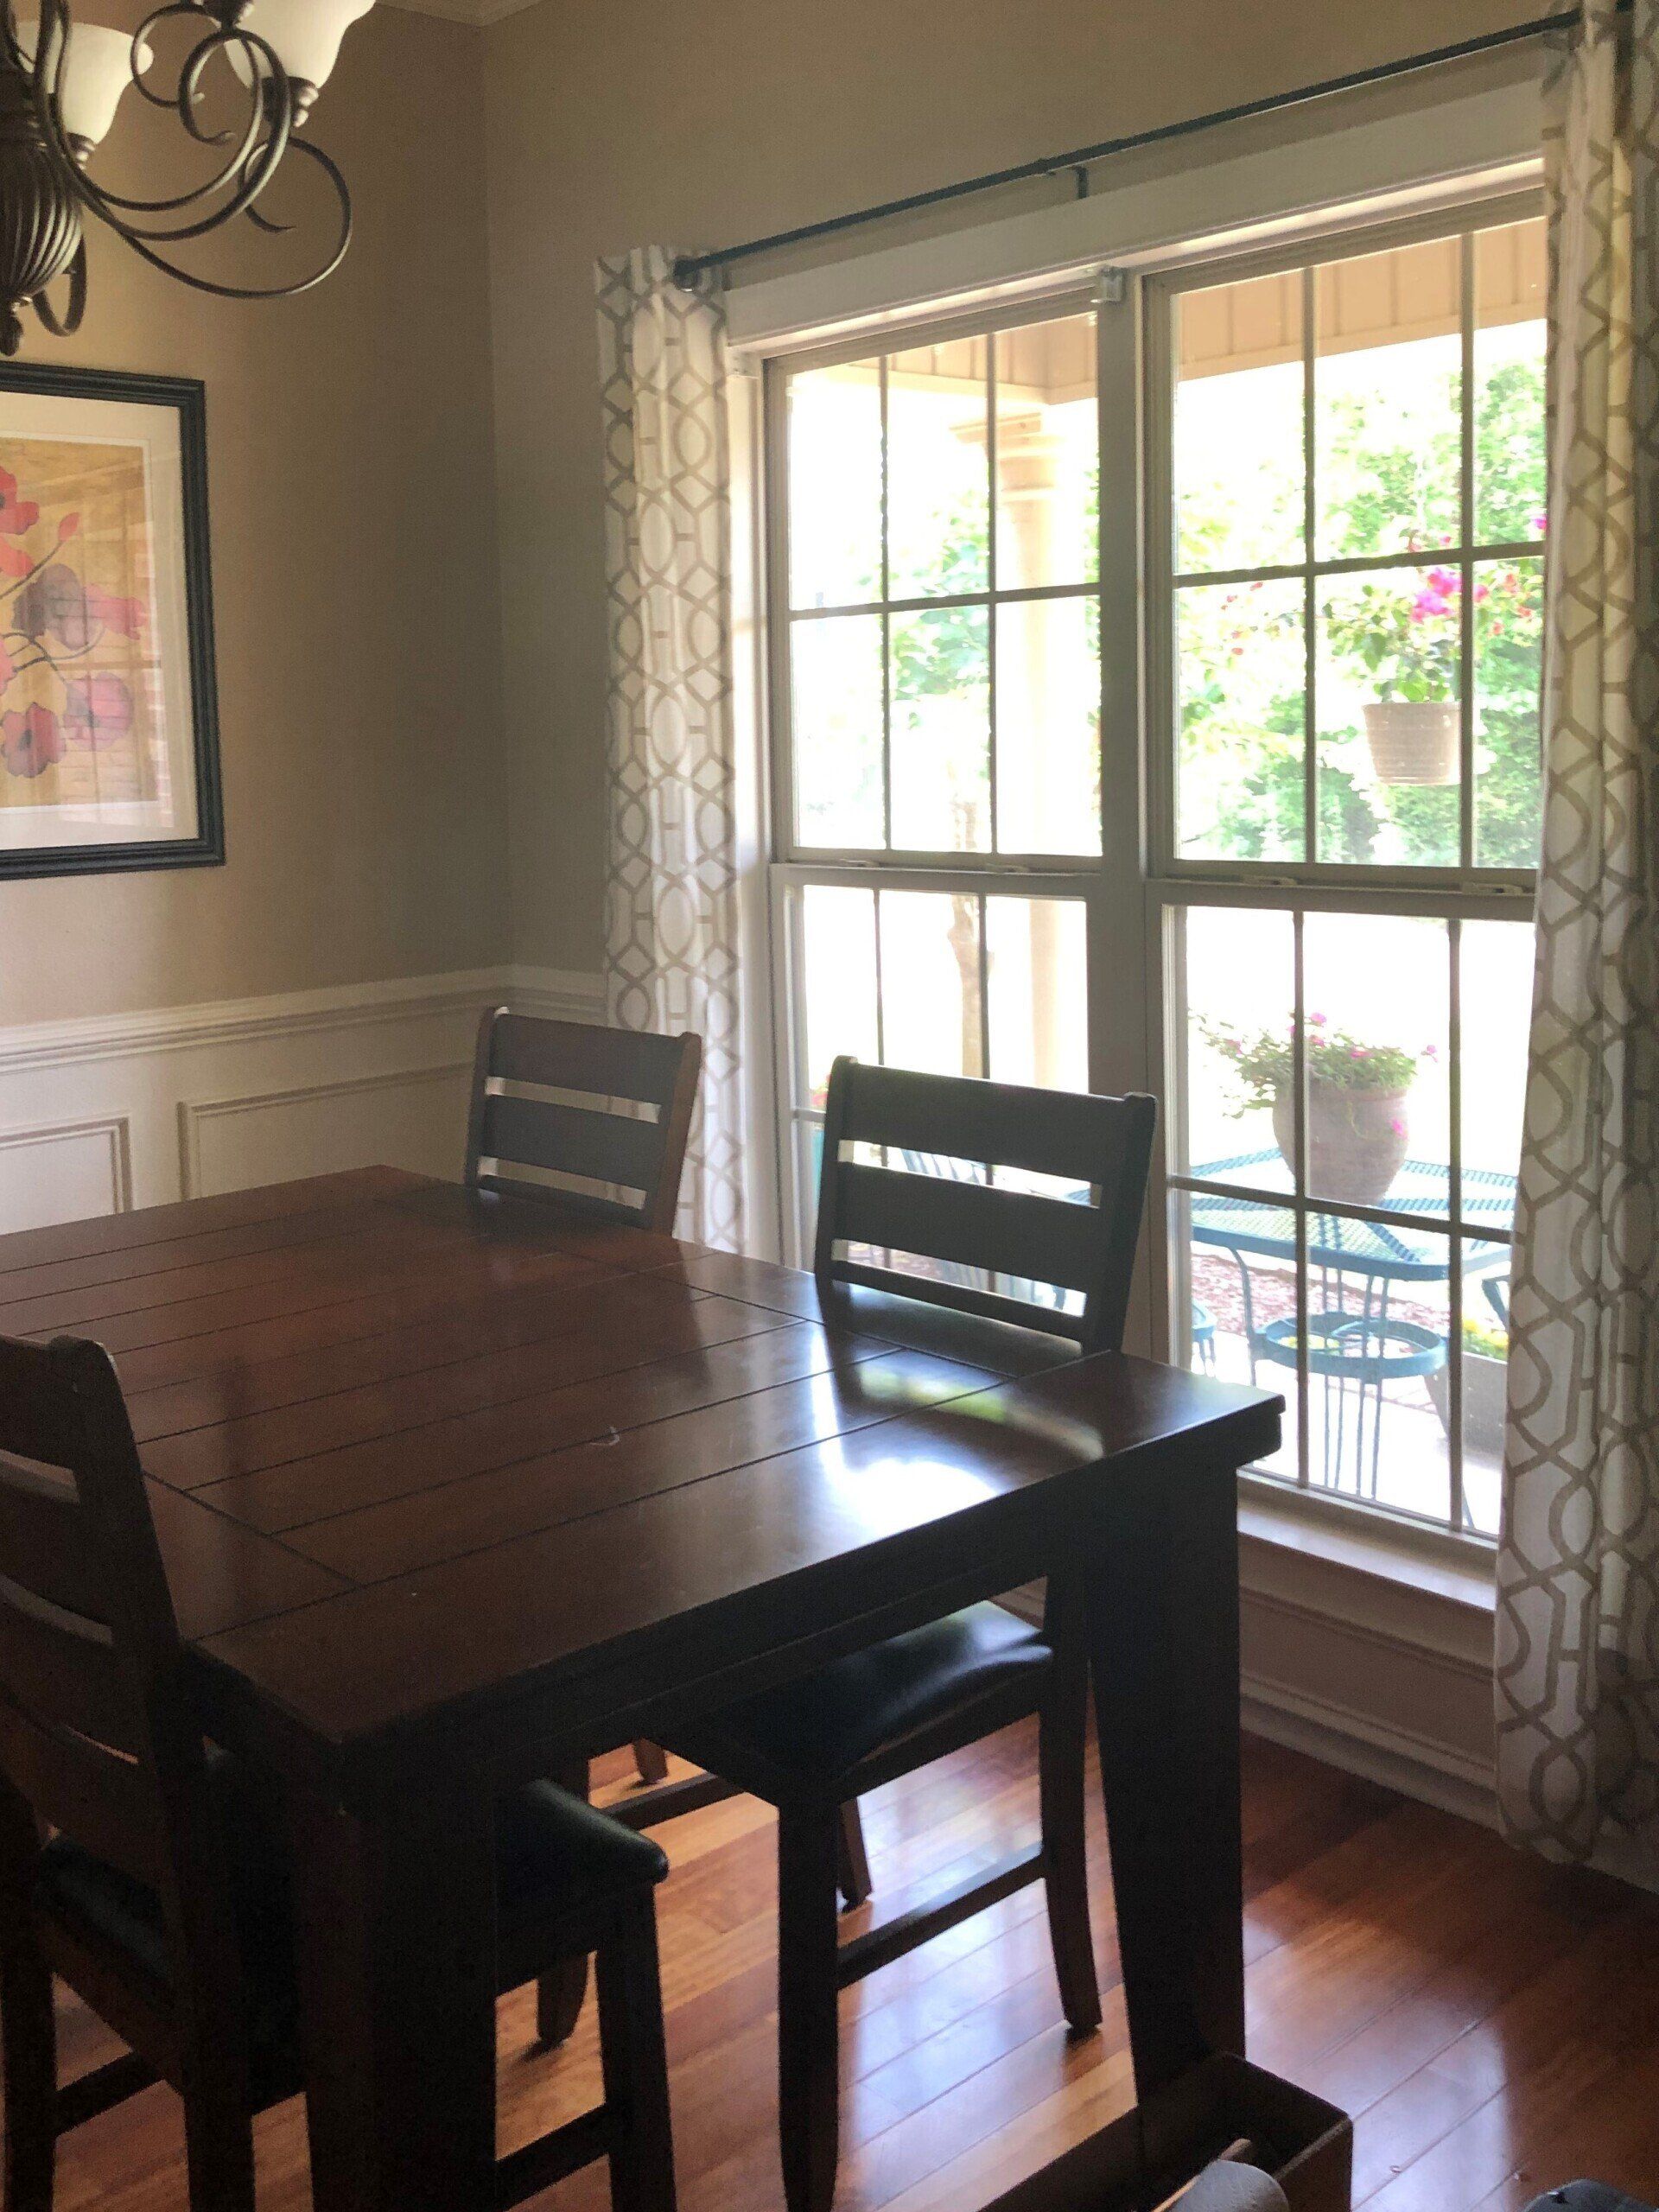 residential window tinting - Bright UV light glare distortion was noticeably filtered out along with 74%  heat. AFTER SPF Preferred Tint in Prattville, AL